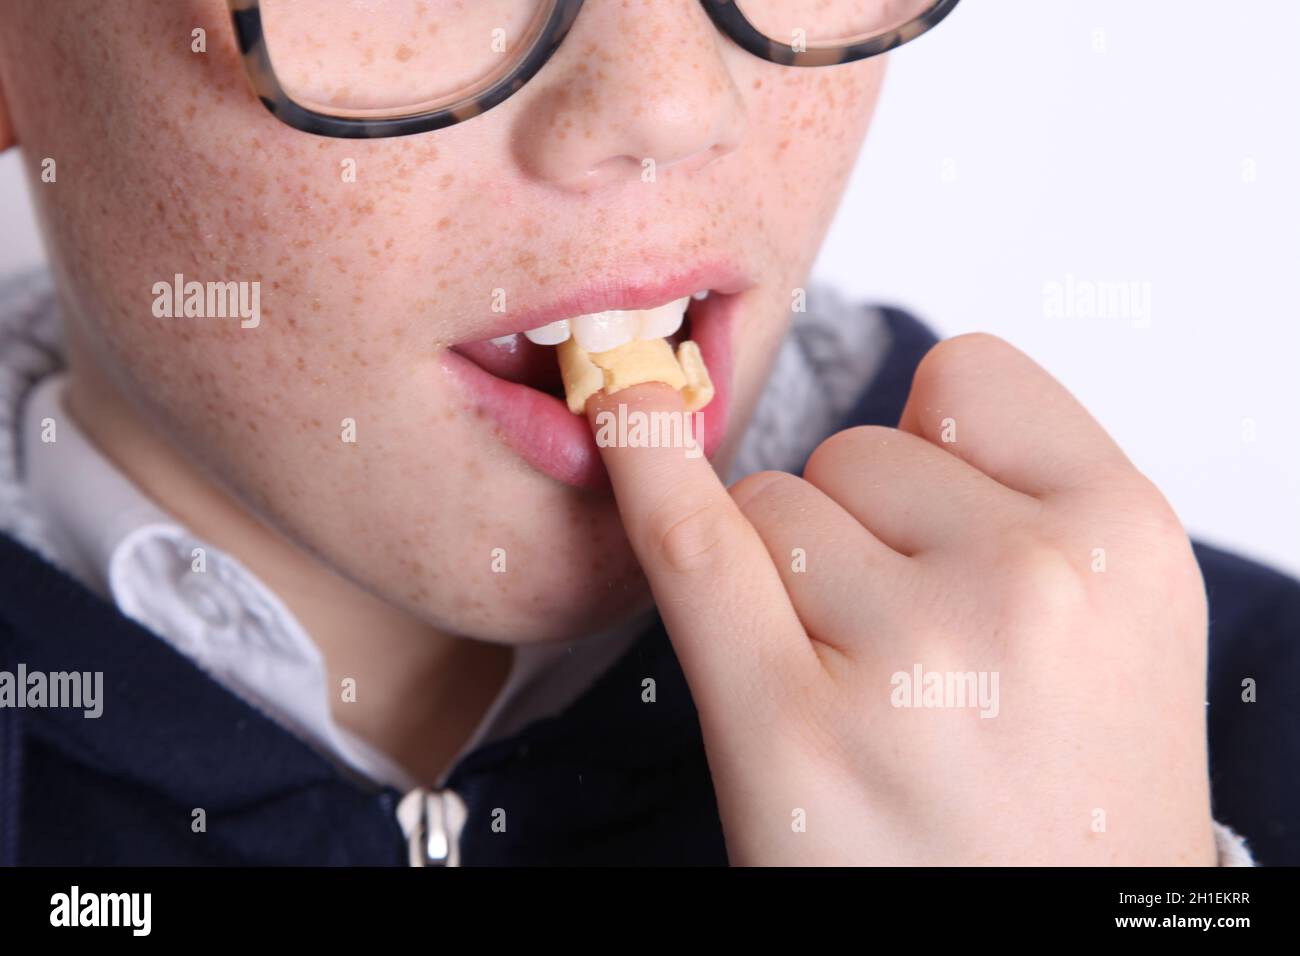 Hula Hoop on finger tip being bitten by freckled boy, close up of mouth and face against white background Stock Photo